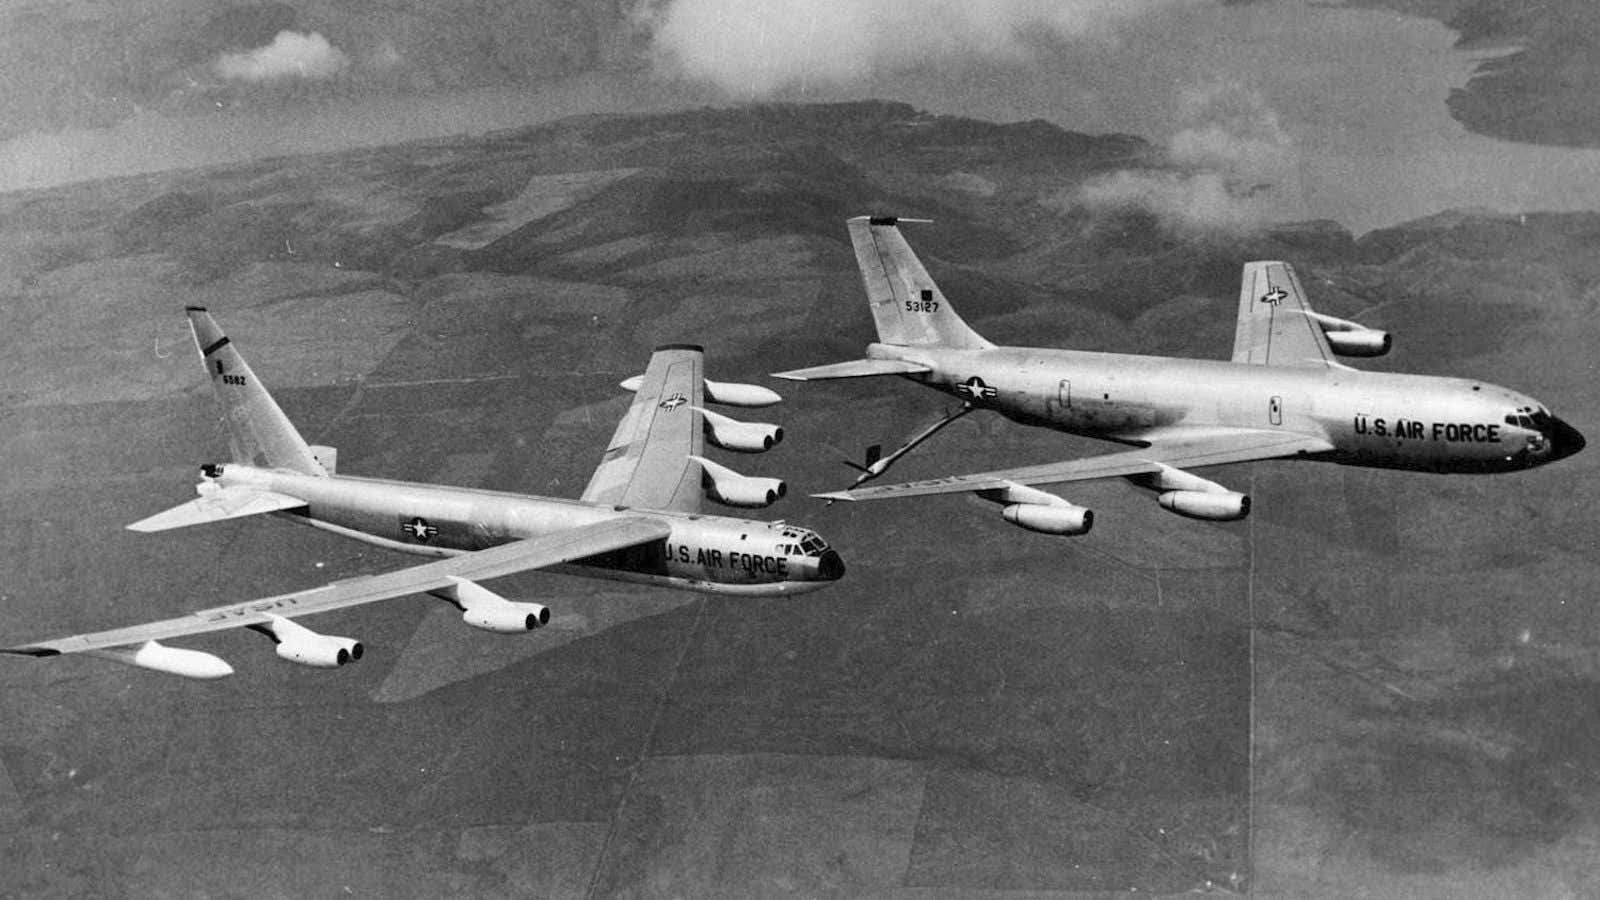 About one third of the US Air Force was on alert in 1967, including B-52 bombers and KC-135 tankers